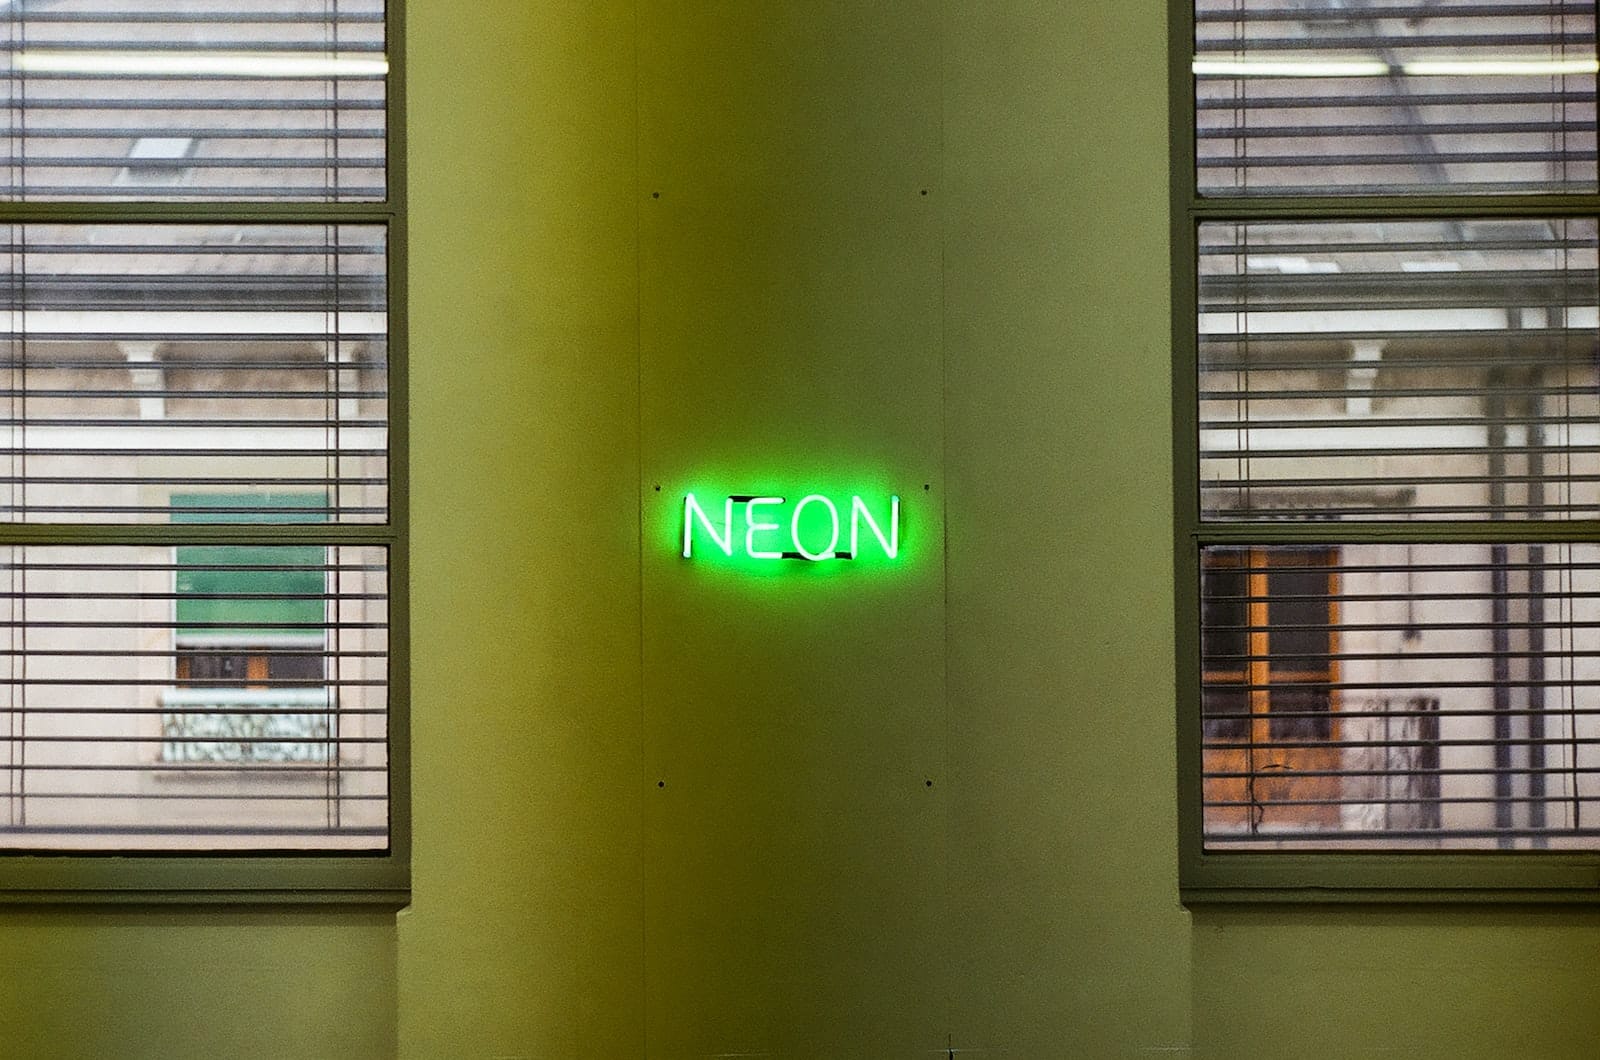 turned on neon signage on wall during daytime